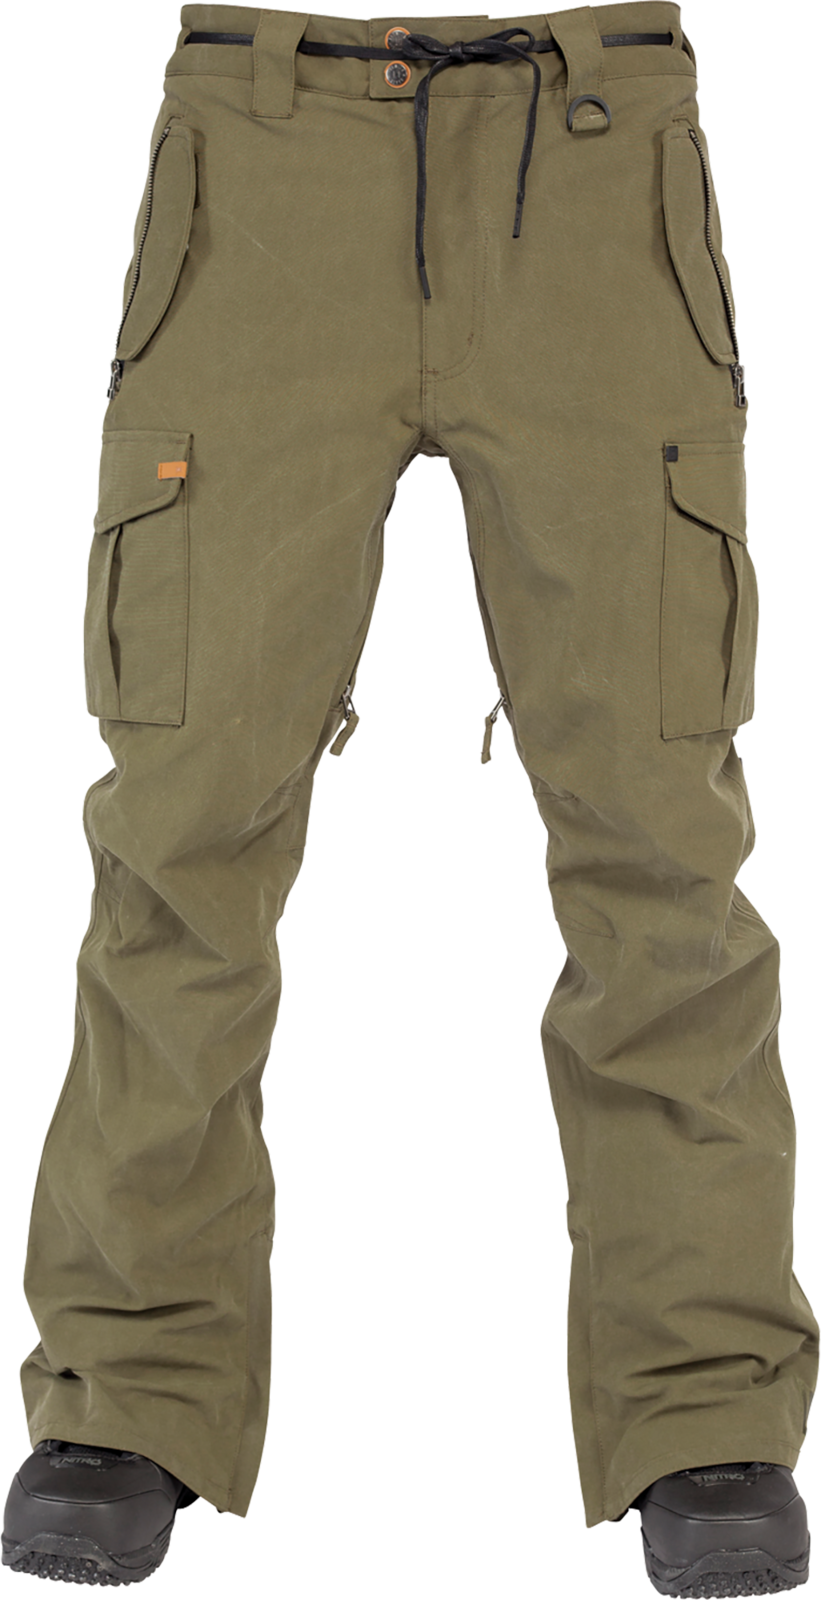 Cargo Pant Png - Cargo Pant Png File, Transparent background PNG HD thumbnail